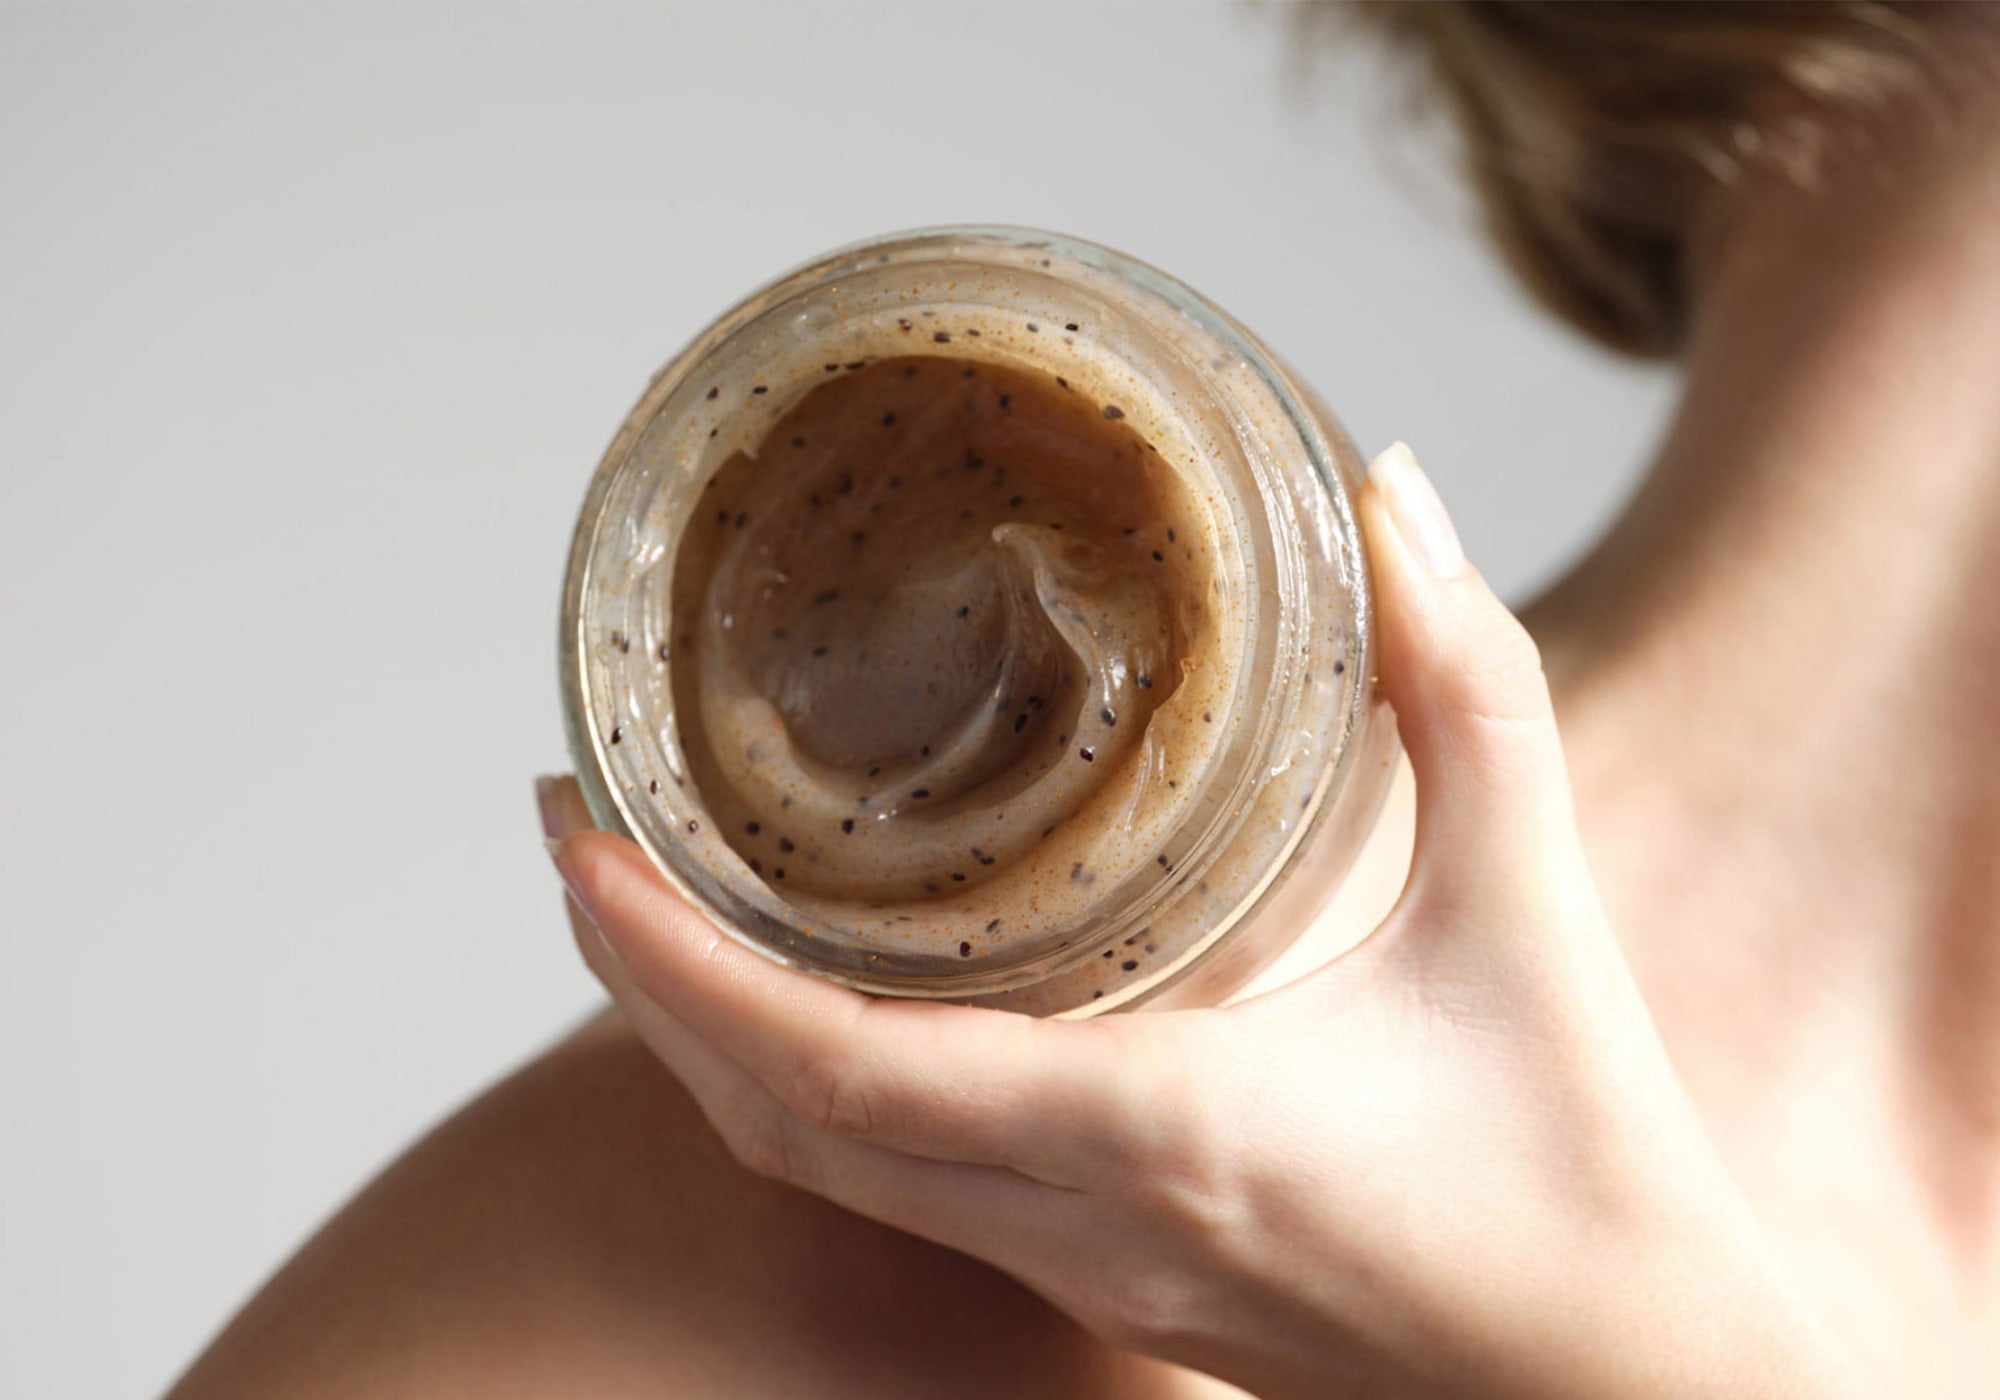 How to Use a Body Scrub Effectively to Help Exfoliate Your Skin